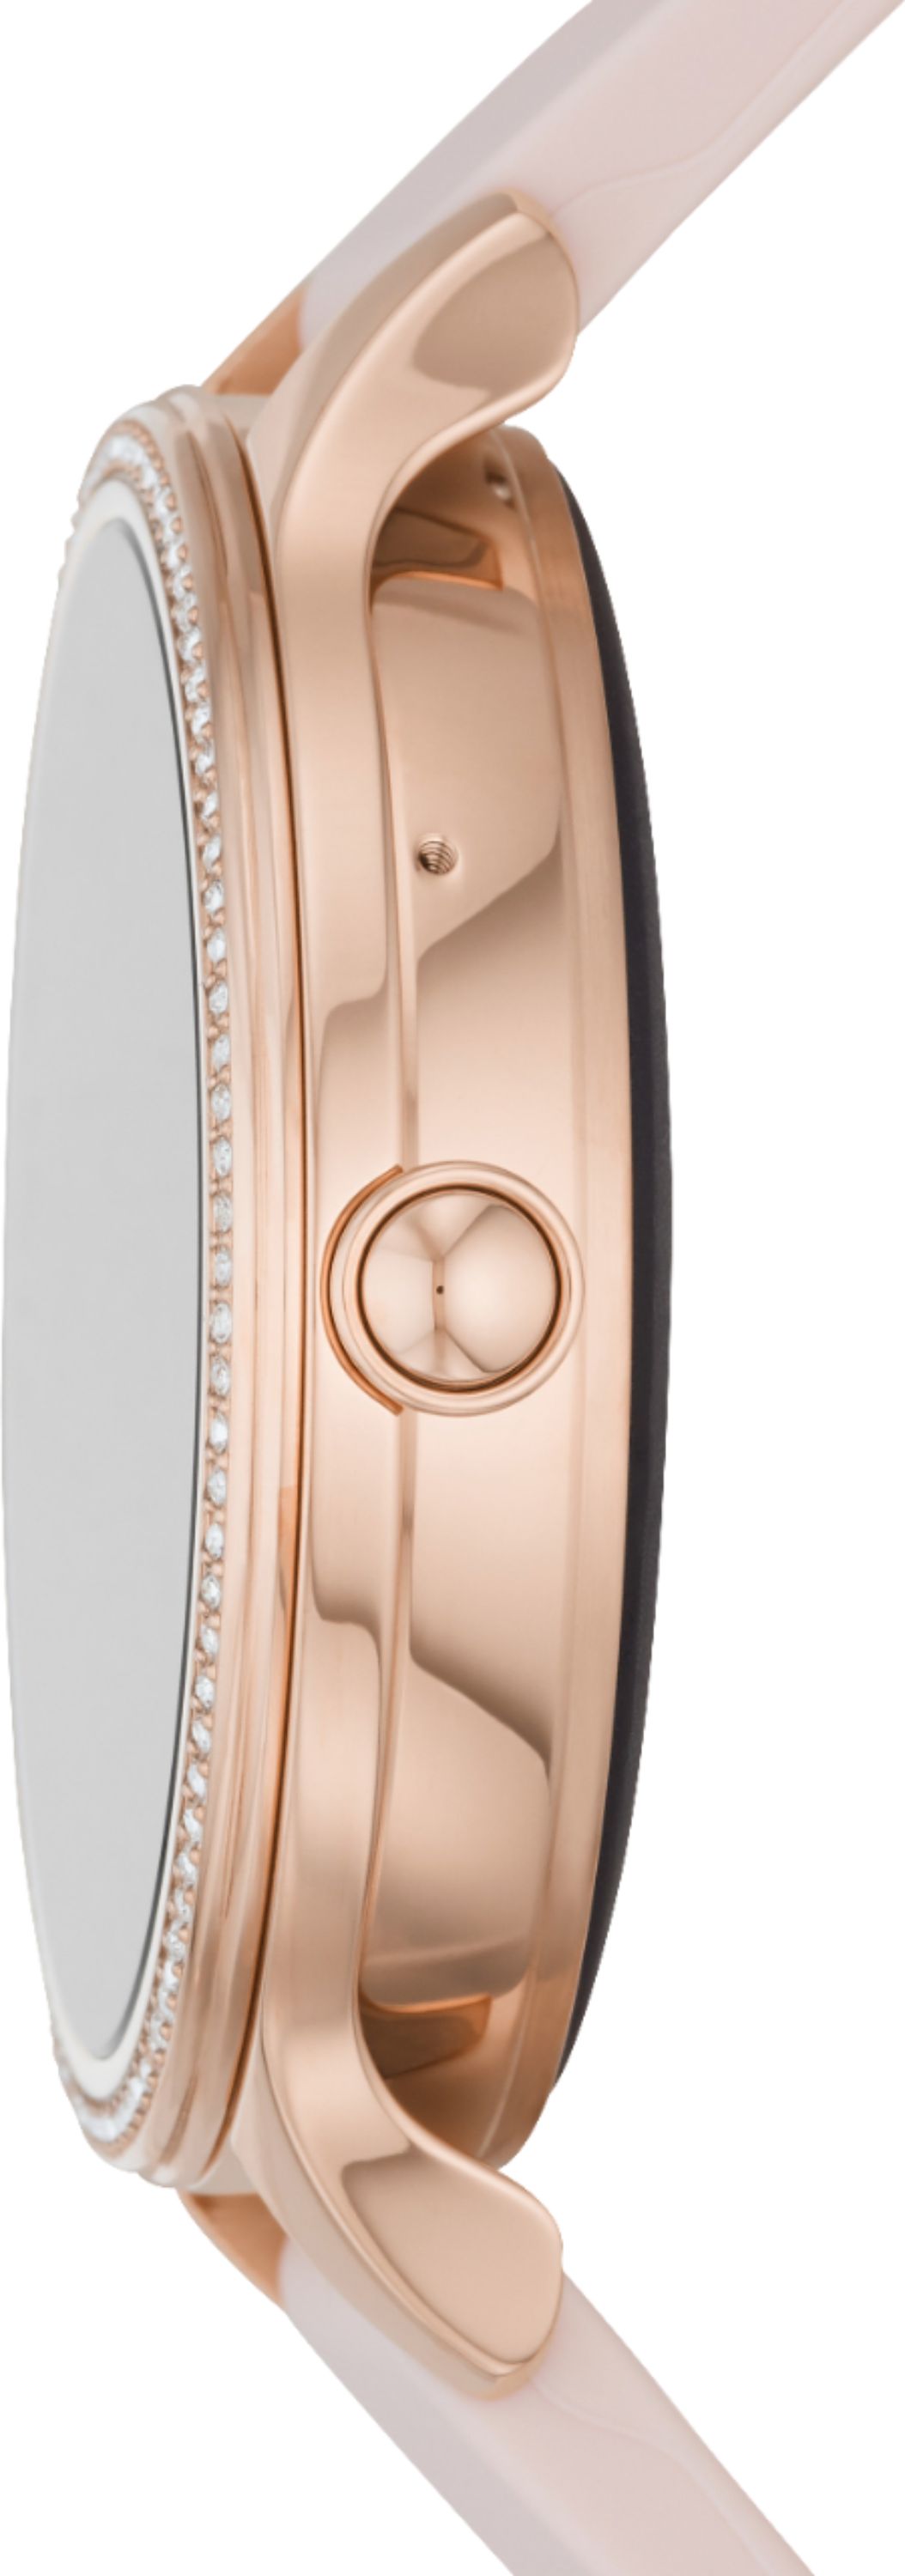 Left View: kate spade new york - Scallop 2 Smartwatch - White Silicone